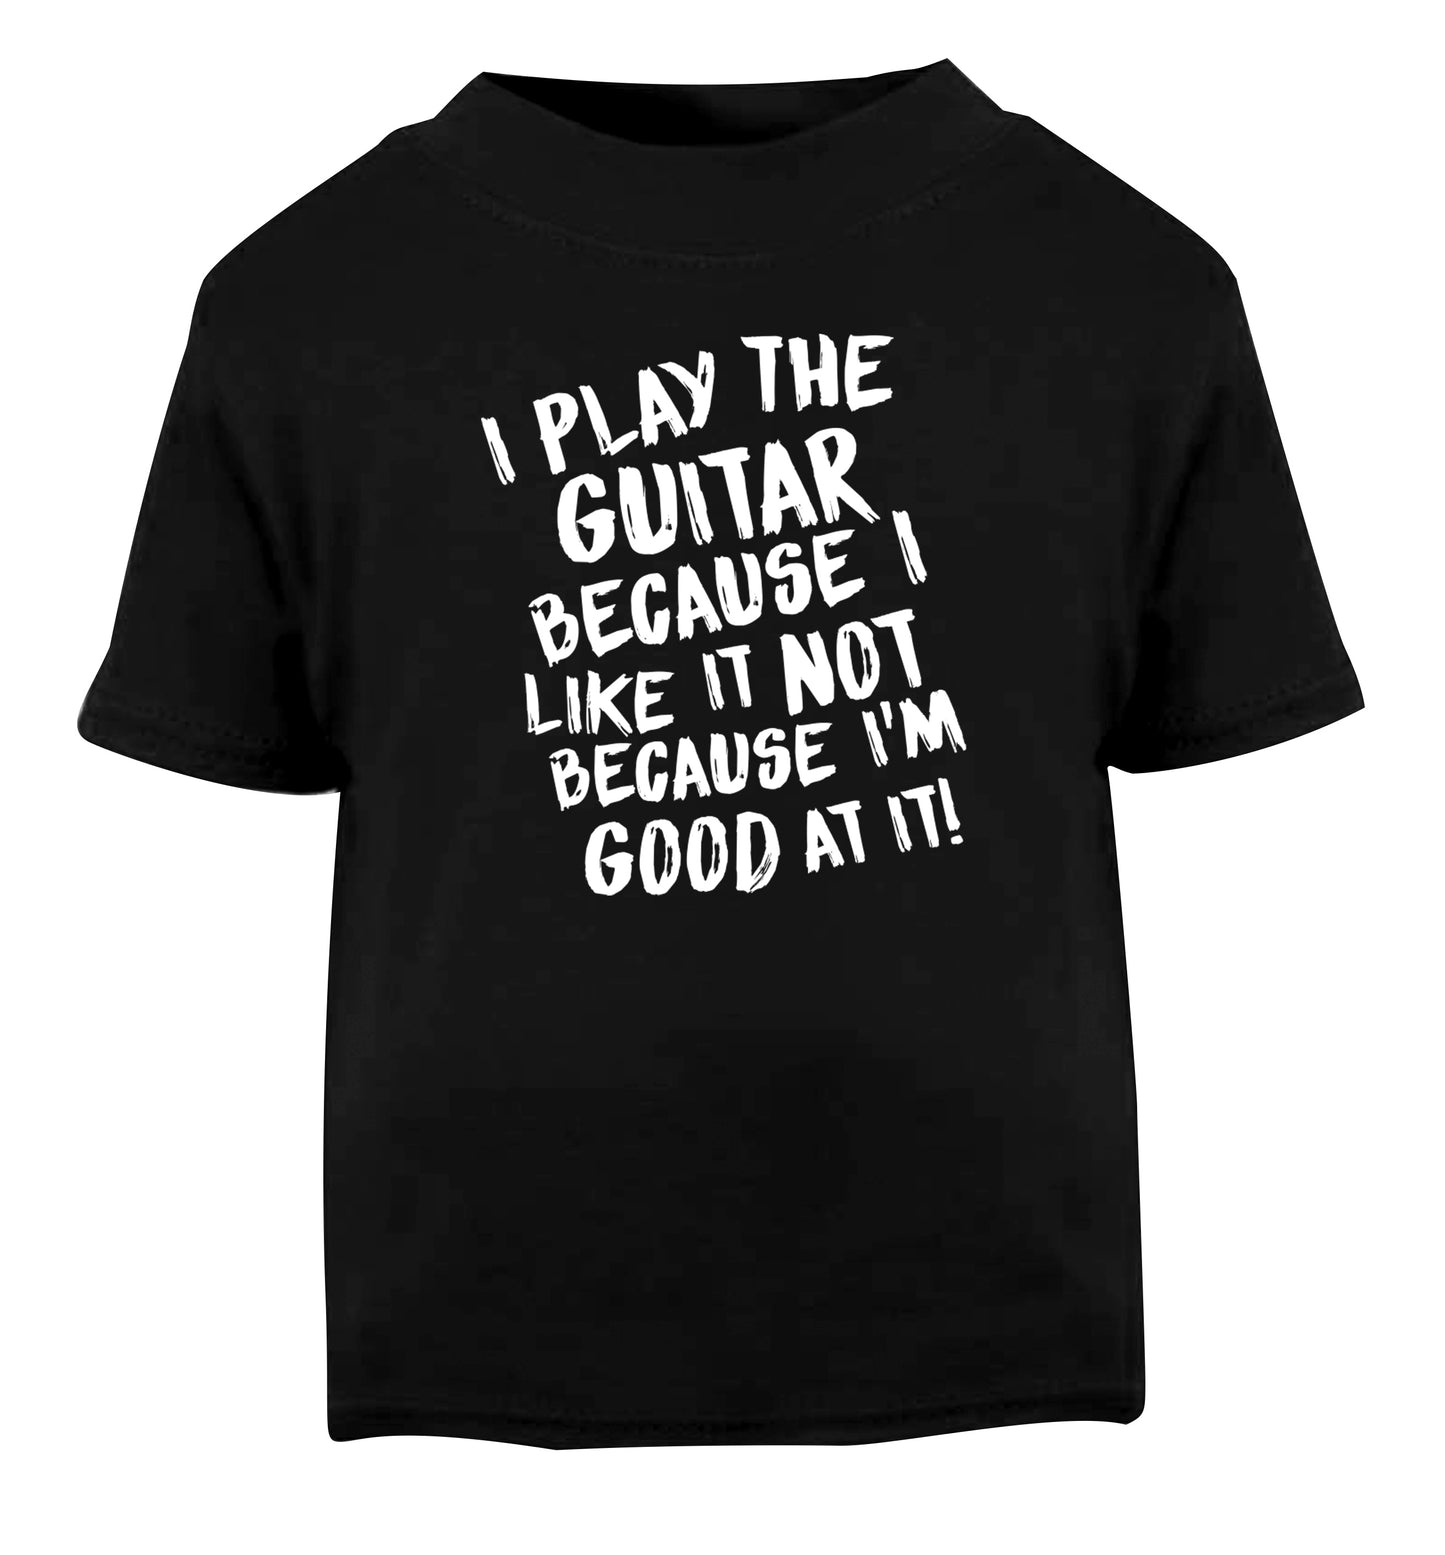 I play the guitar because I like it not because I'm good at it Black Baby Toddler Tshirt 2 years